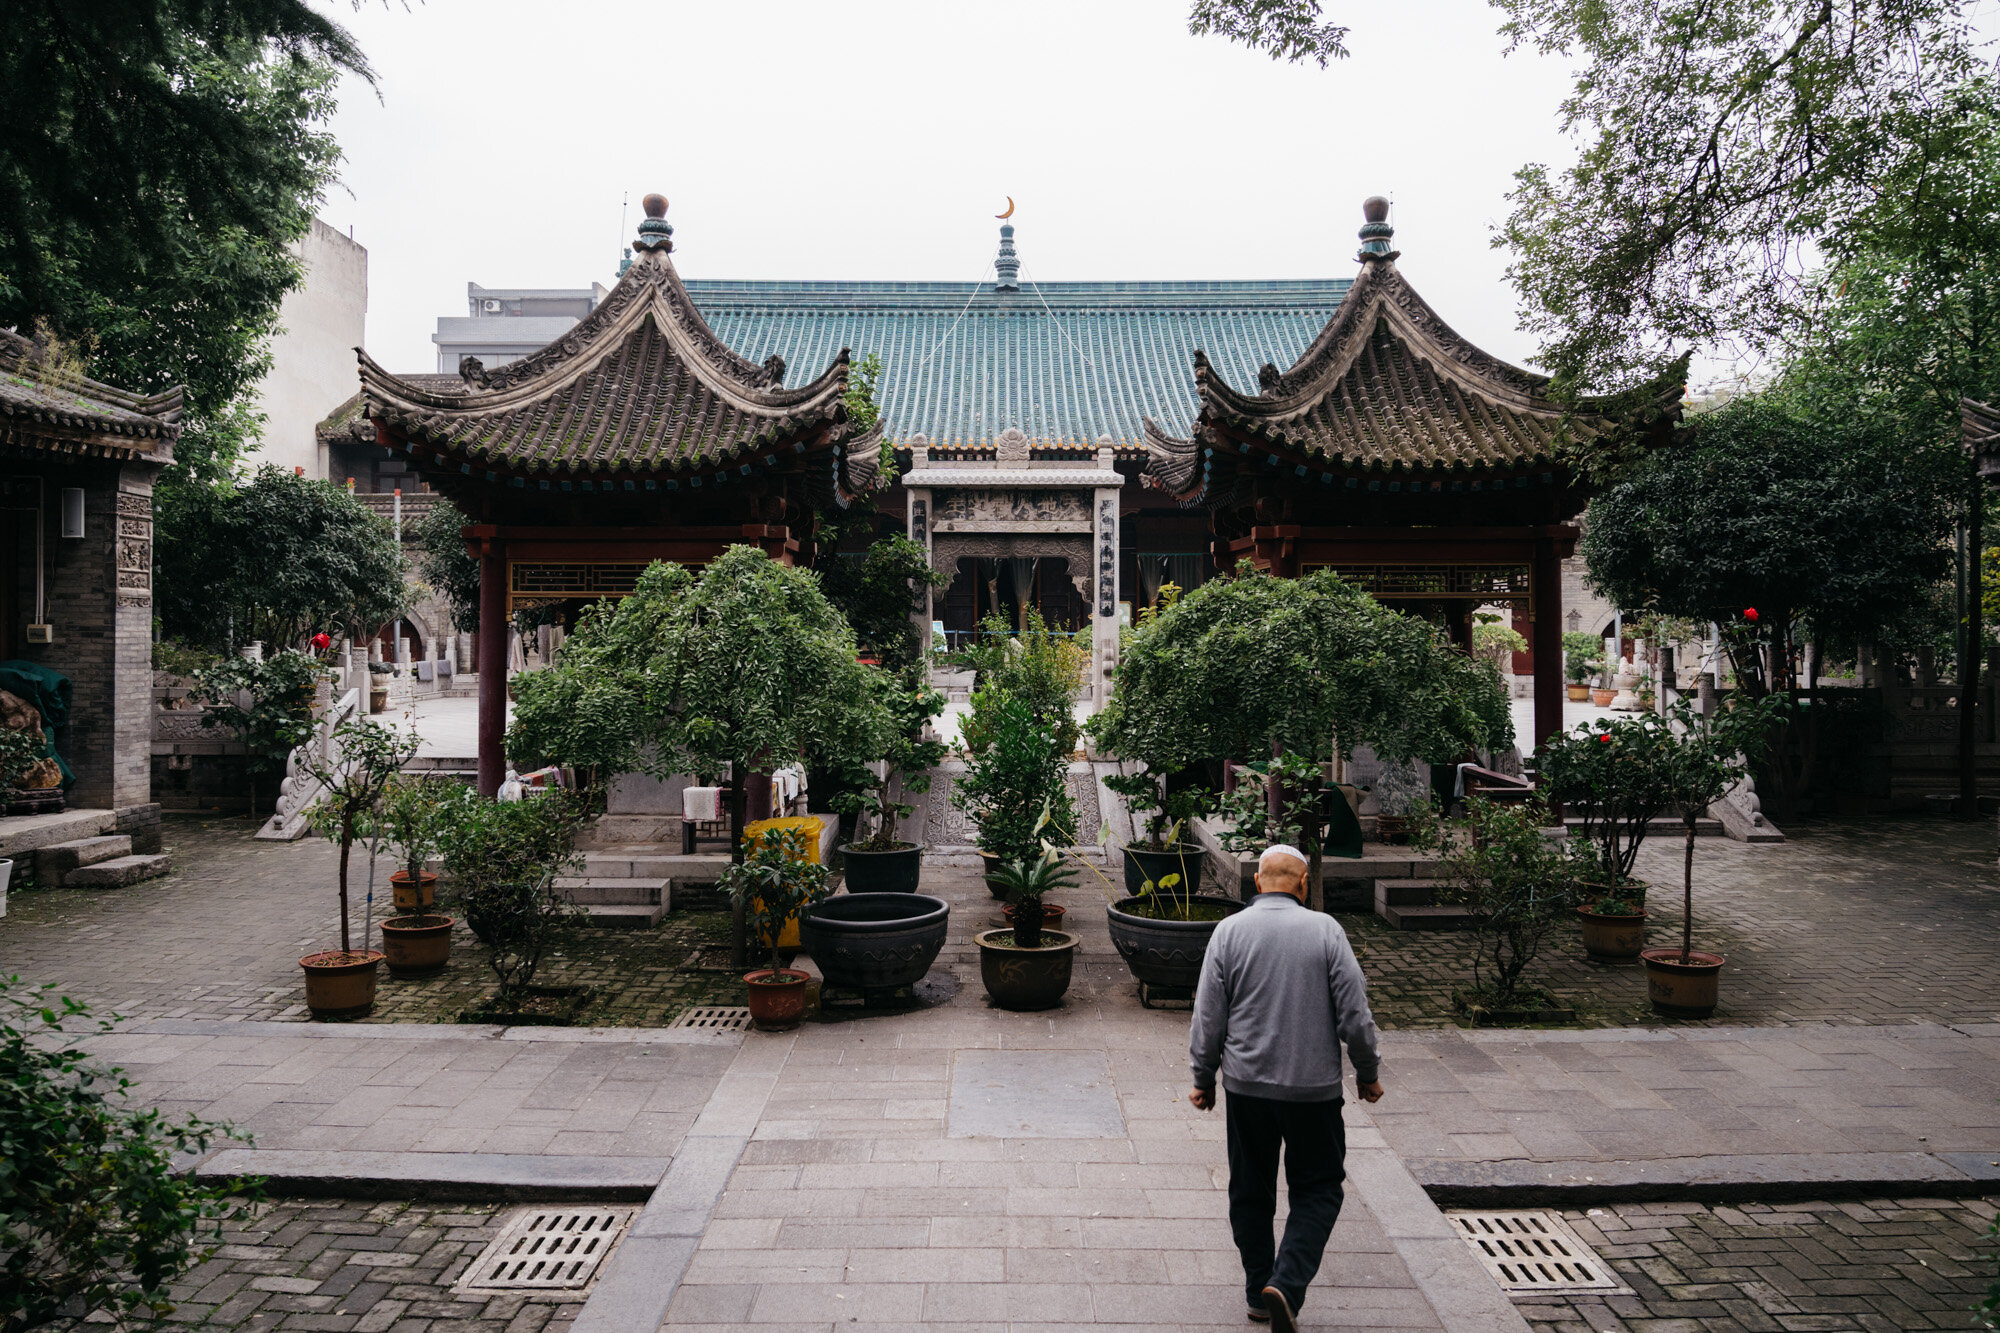  The nearby Dapiyuan Mosque, built in 1411 